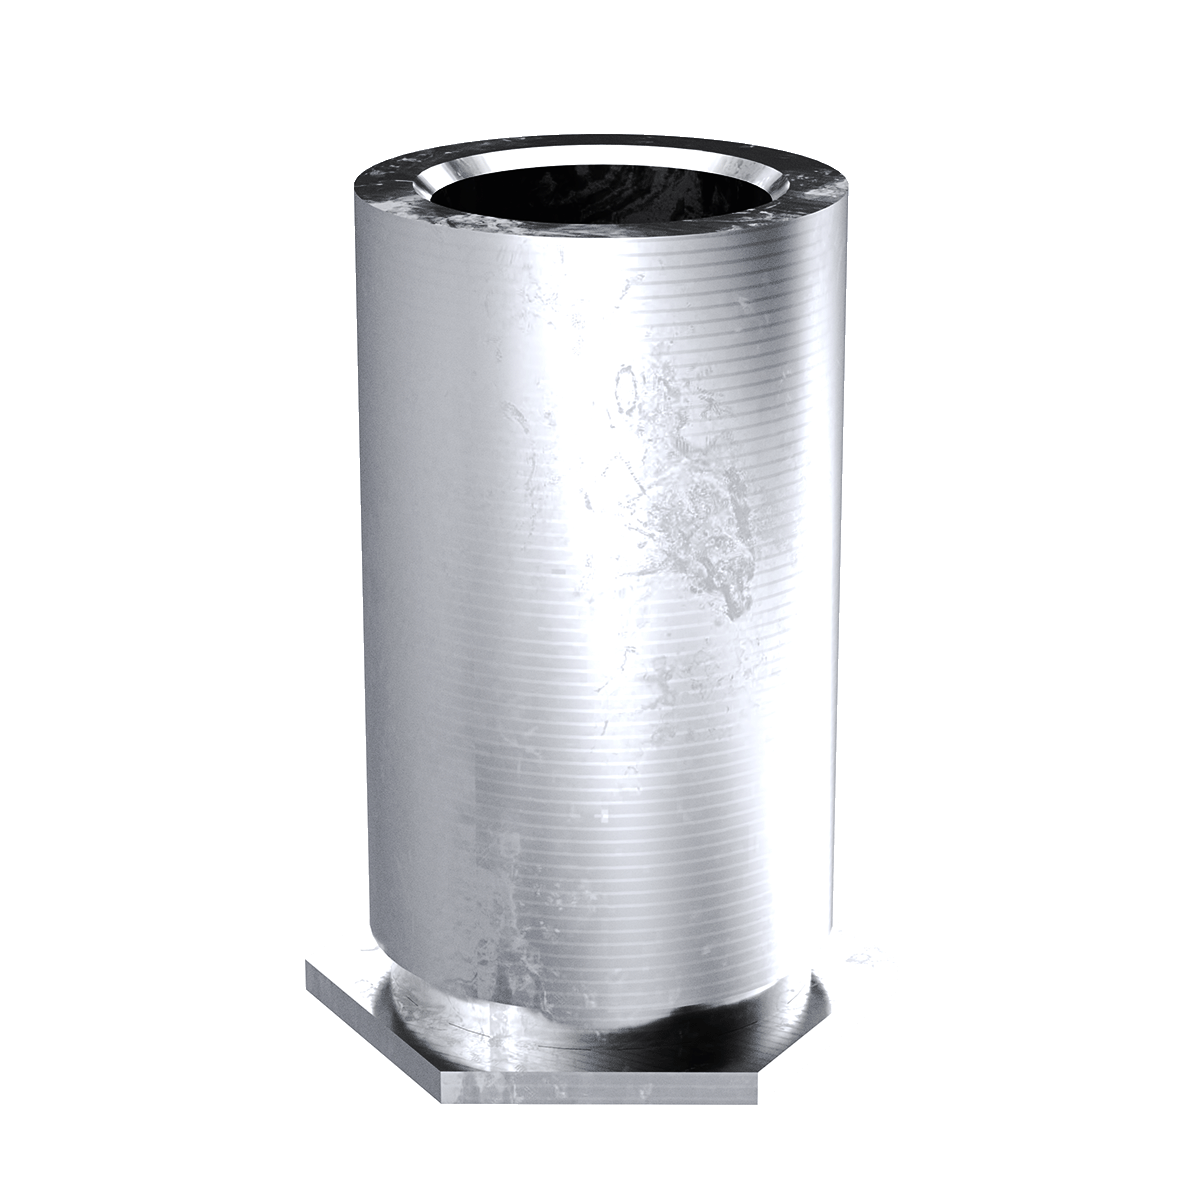 Self-Clinching Standoff, Through Unthreaded, 300 Series Stainless Steel, Passivated, 5.1 x 14, 100 Pack